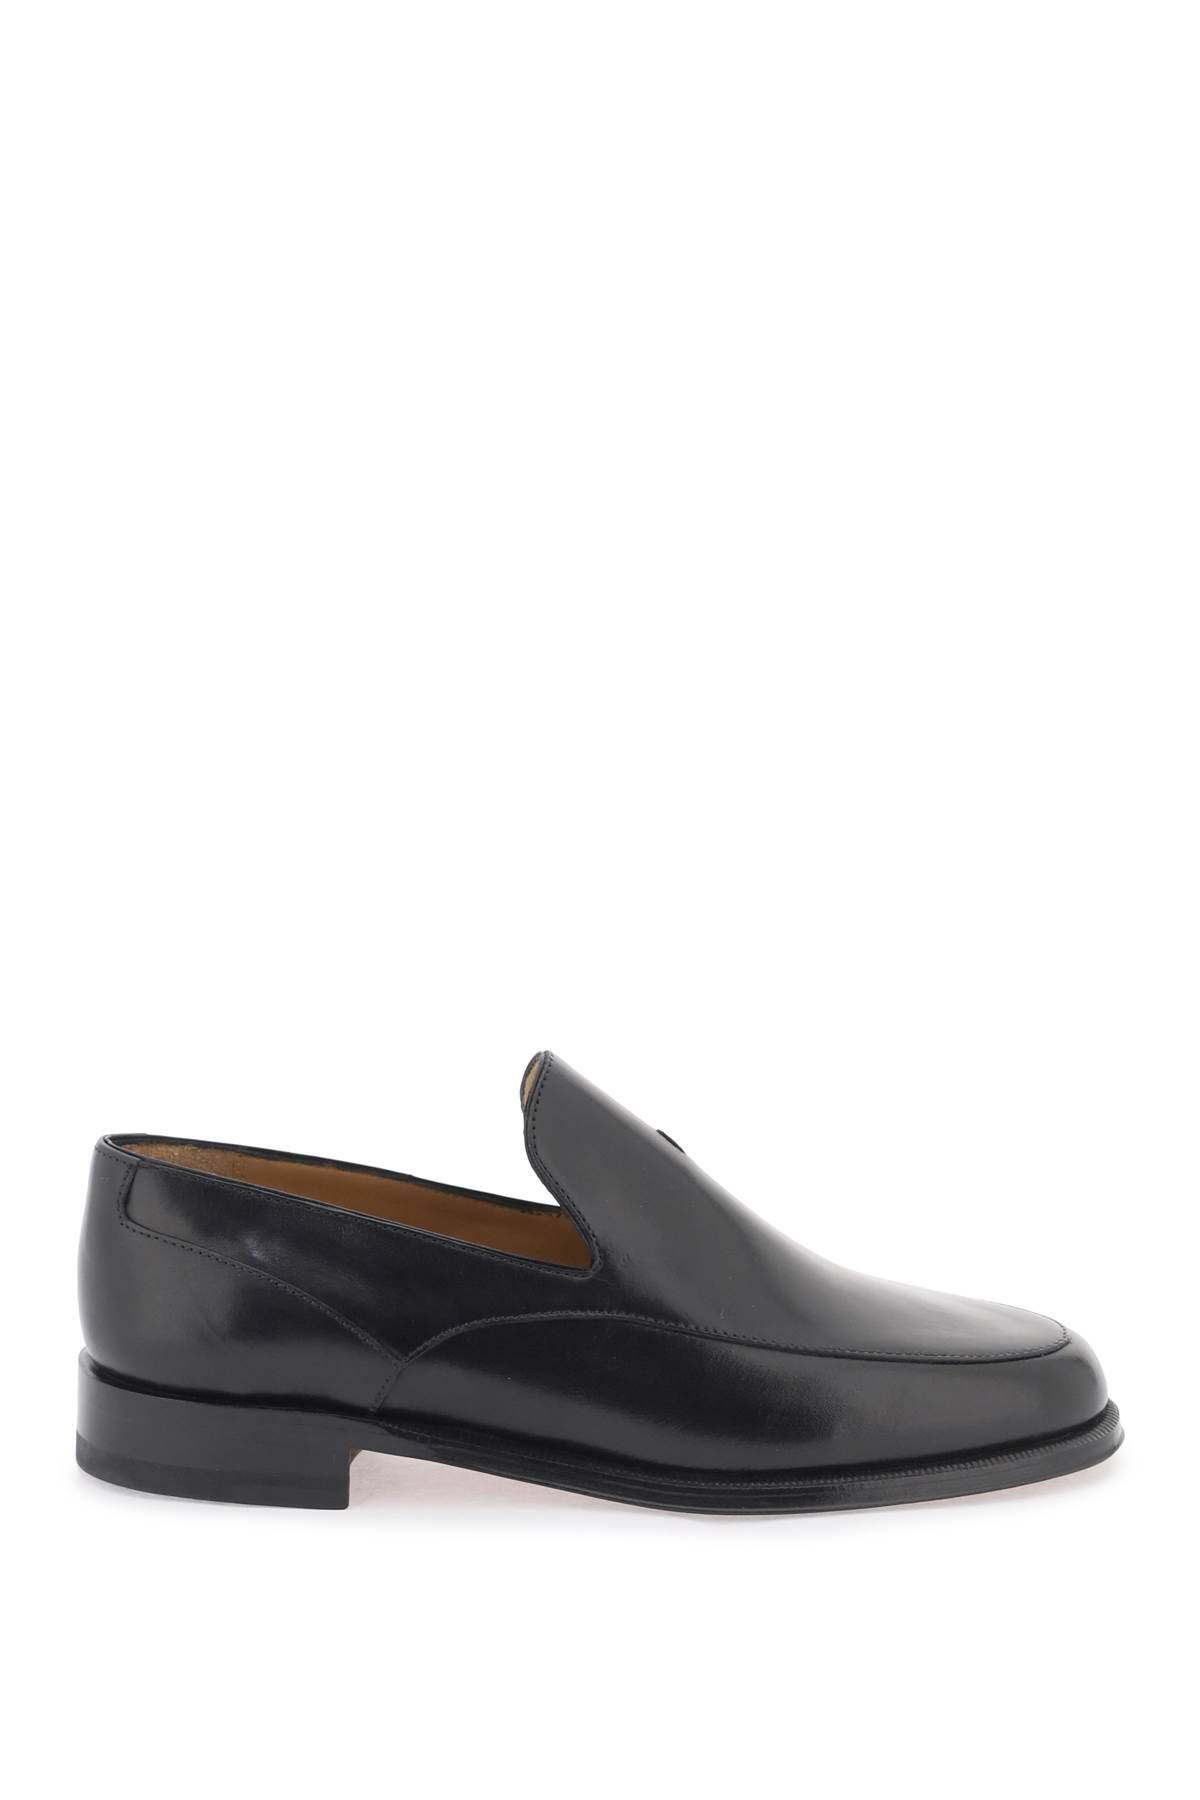 The Row THE ROW enzo loafers